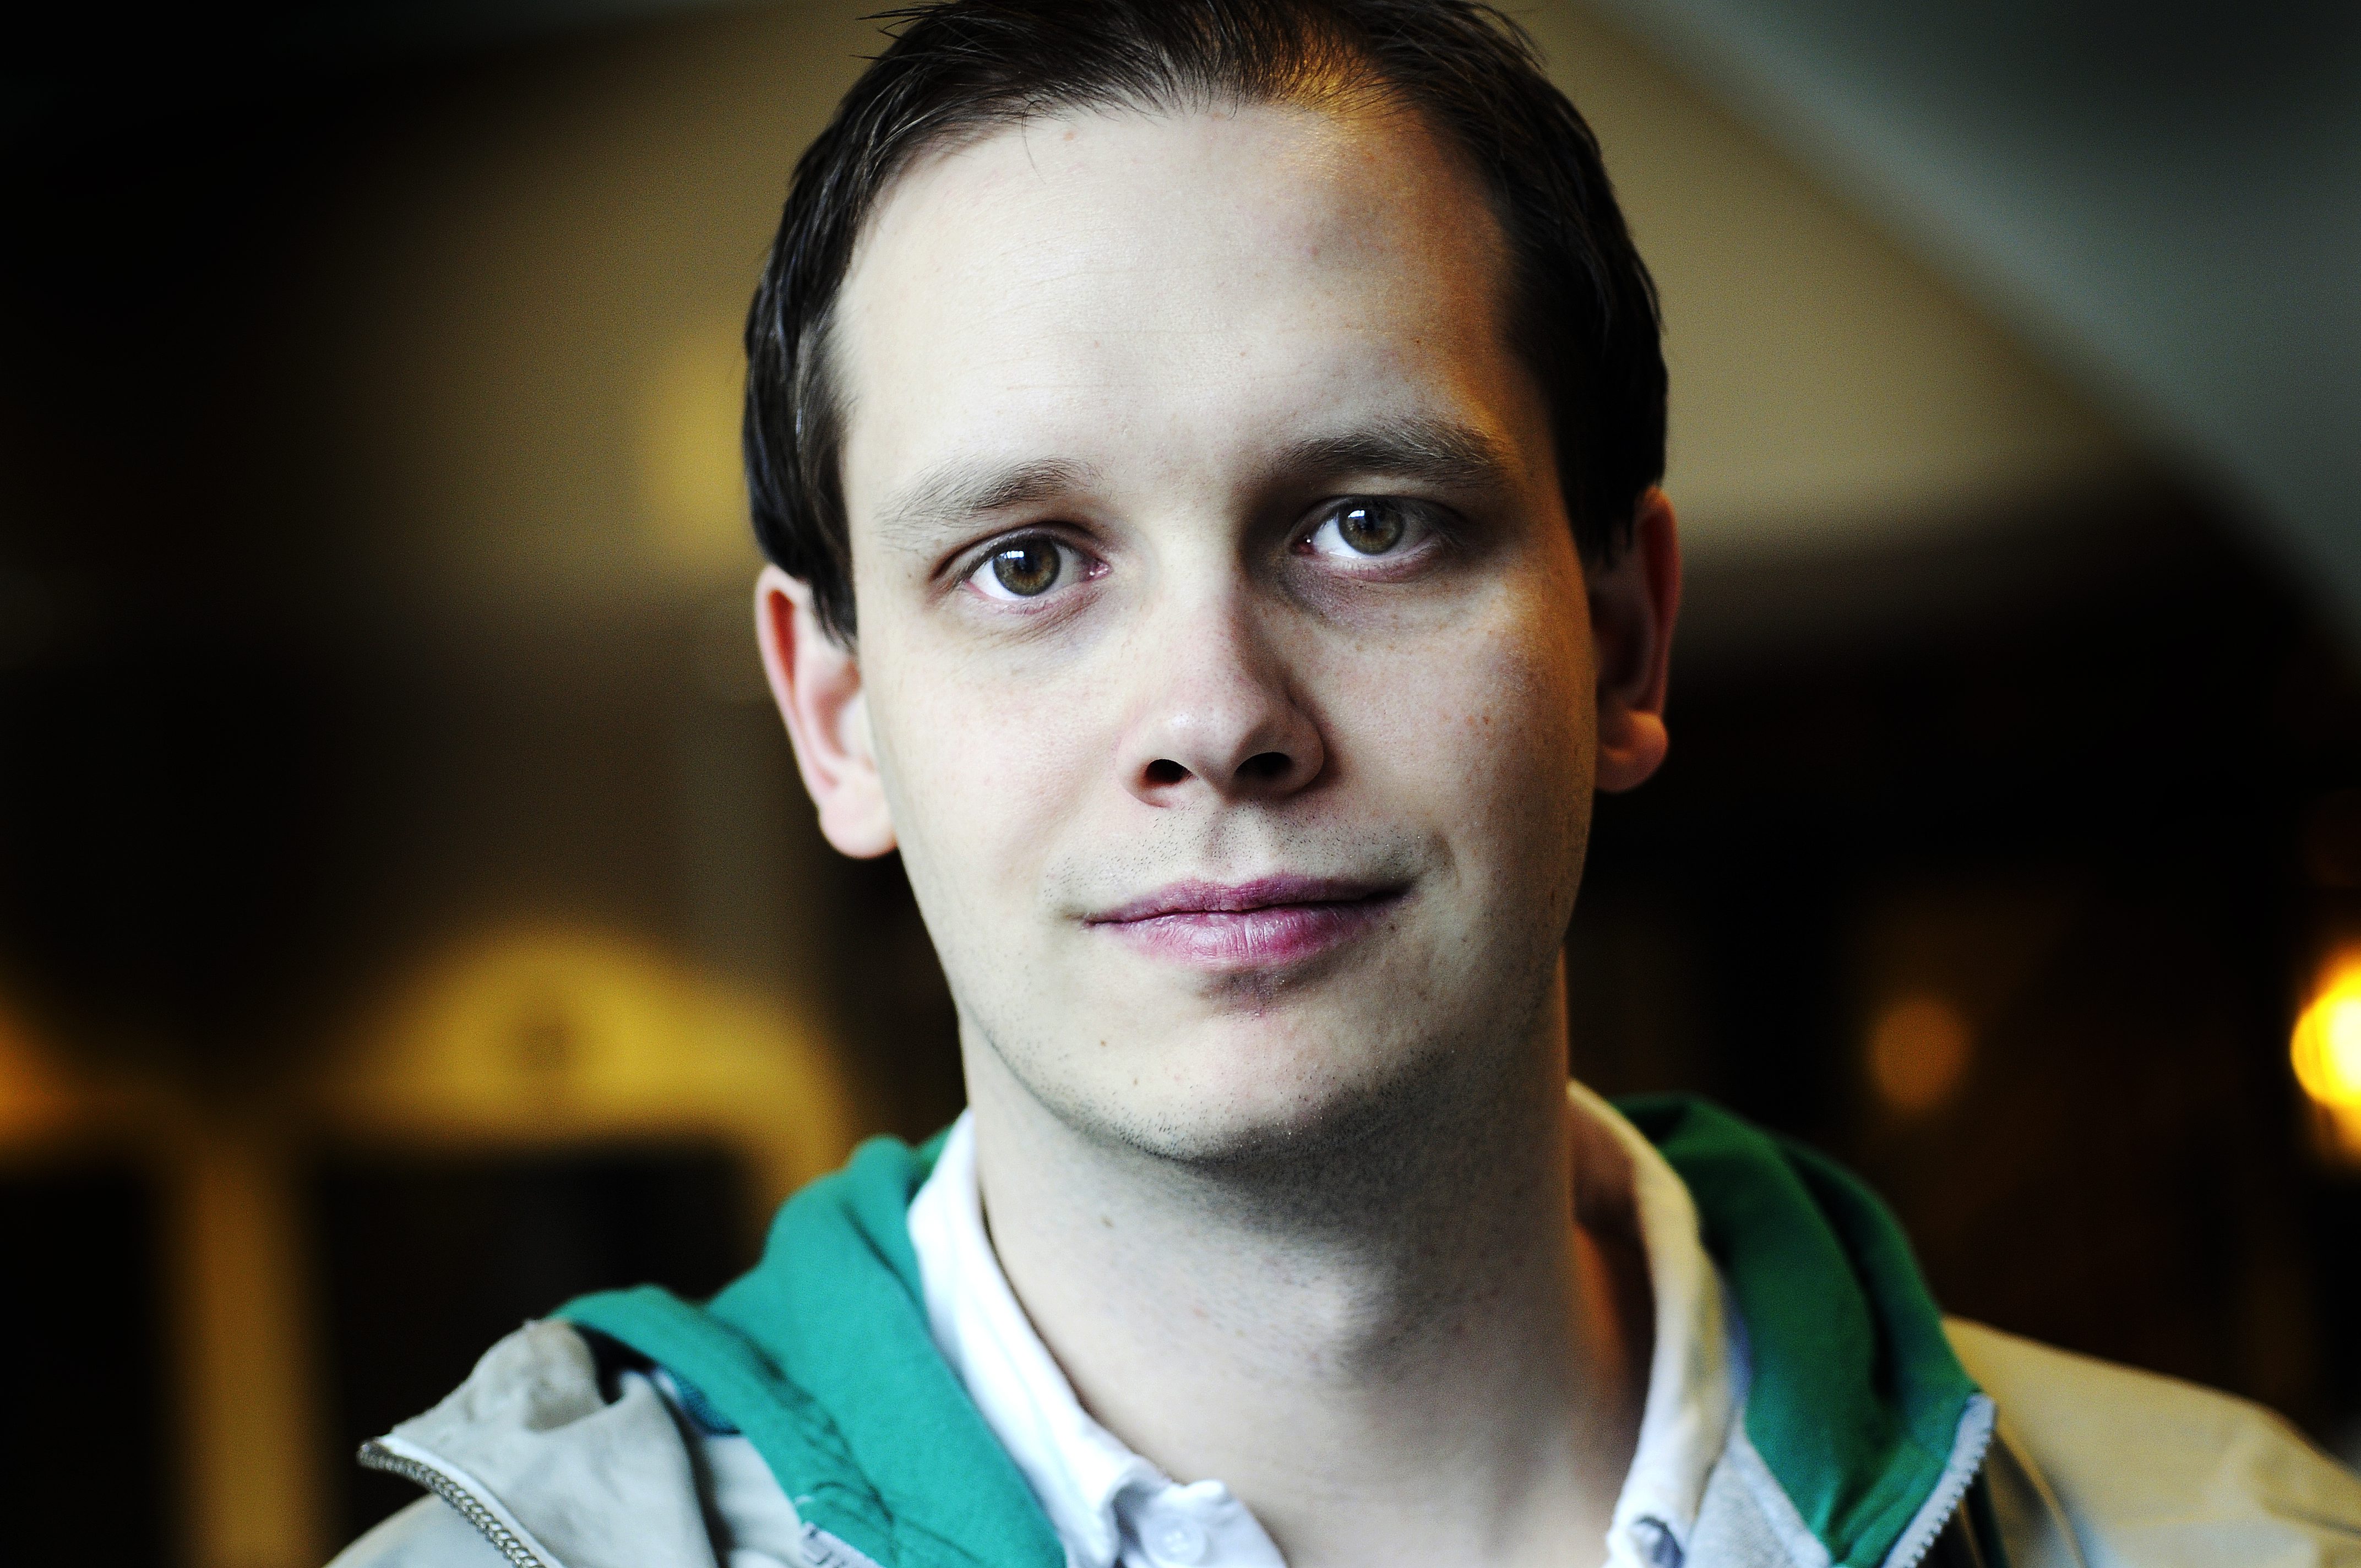 Fildelning, Peter Sunde, The Pirate Bay